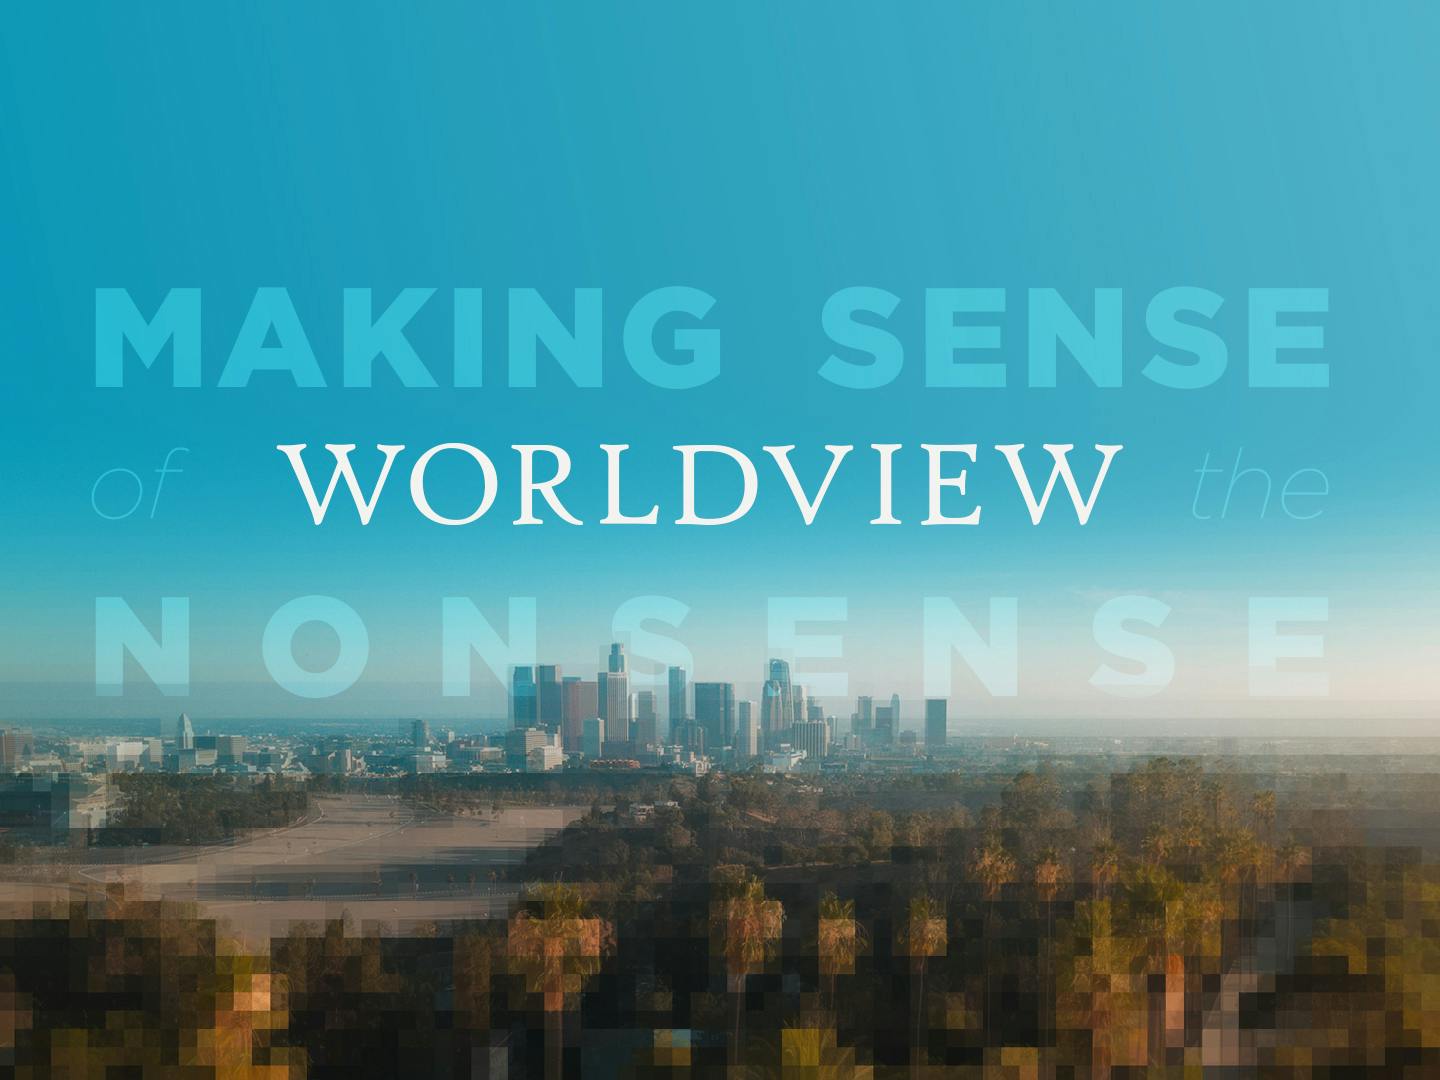 MSOTN 1 - Making Sense of our Worldview cover for post